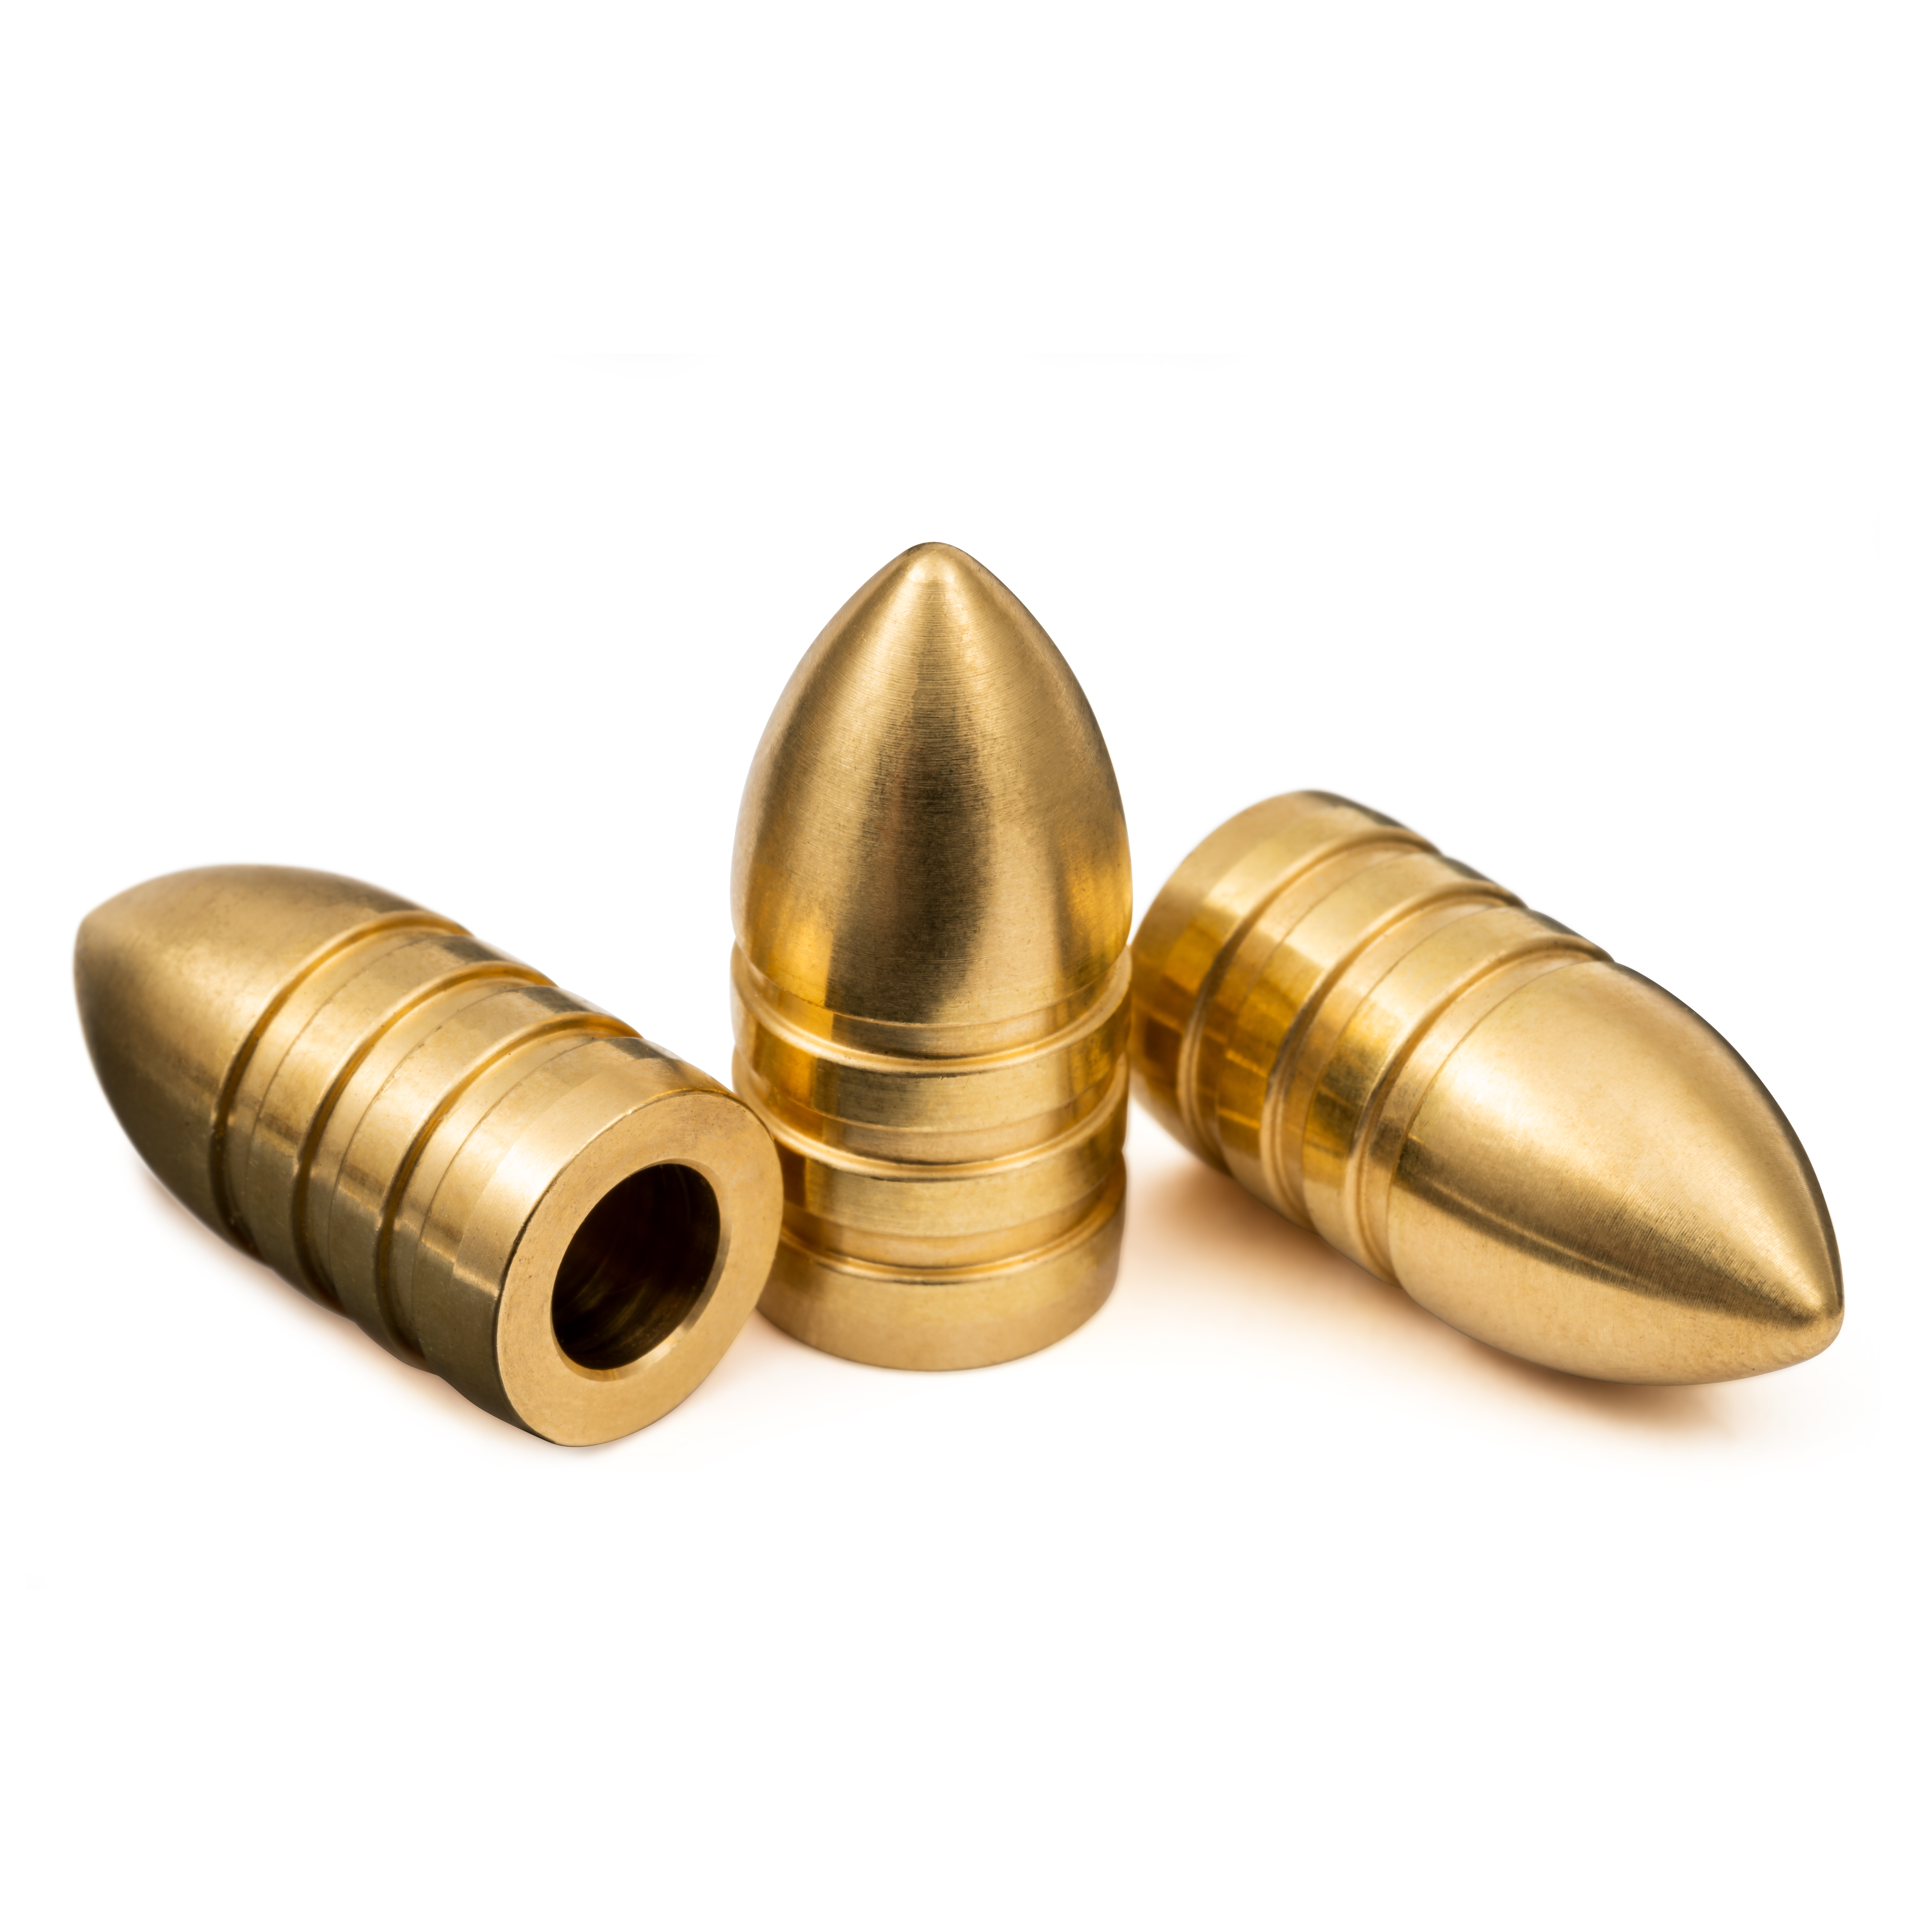 Steinel Ammunition Brass Spike Ammo for .50 Beowulf Uppers Now Available «  Tactical Fanboy